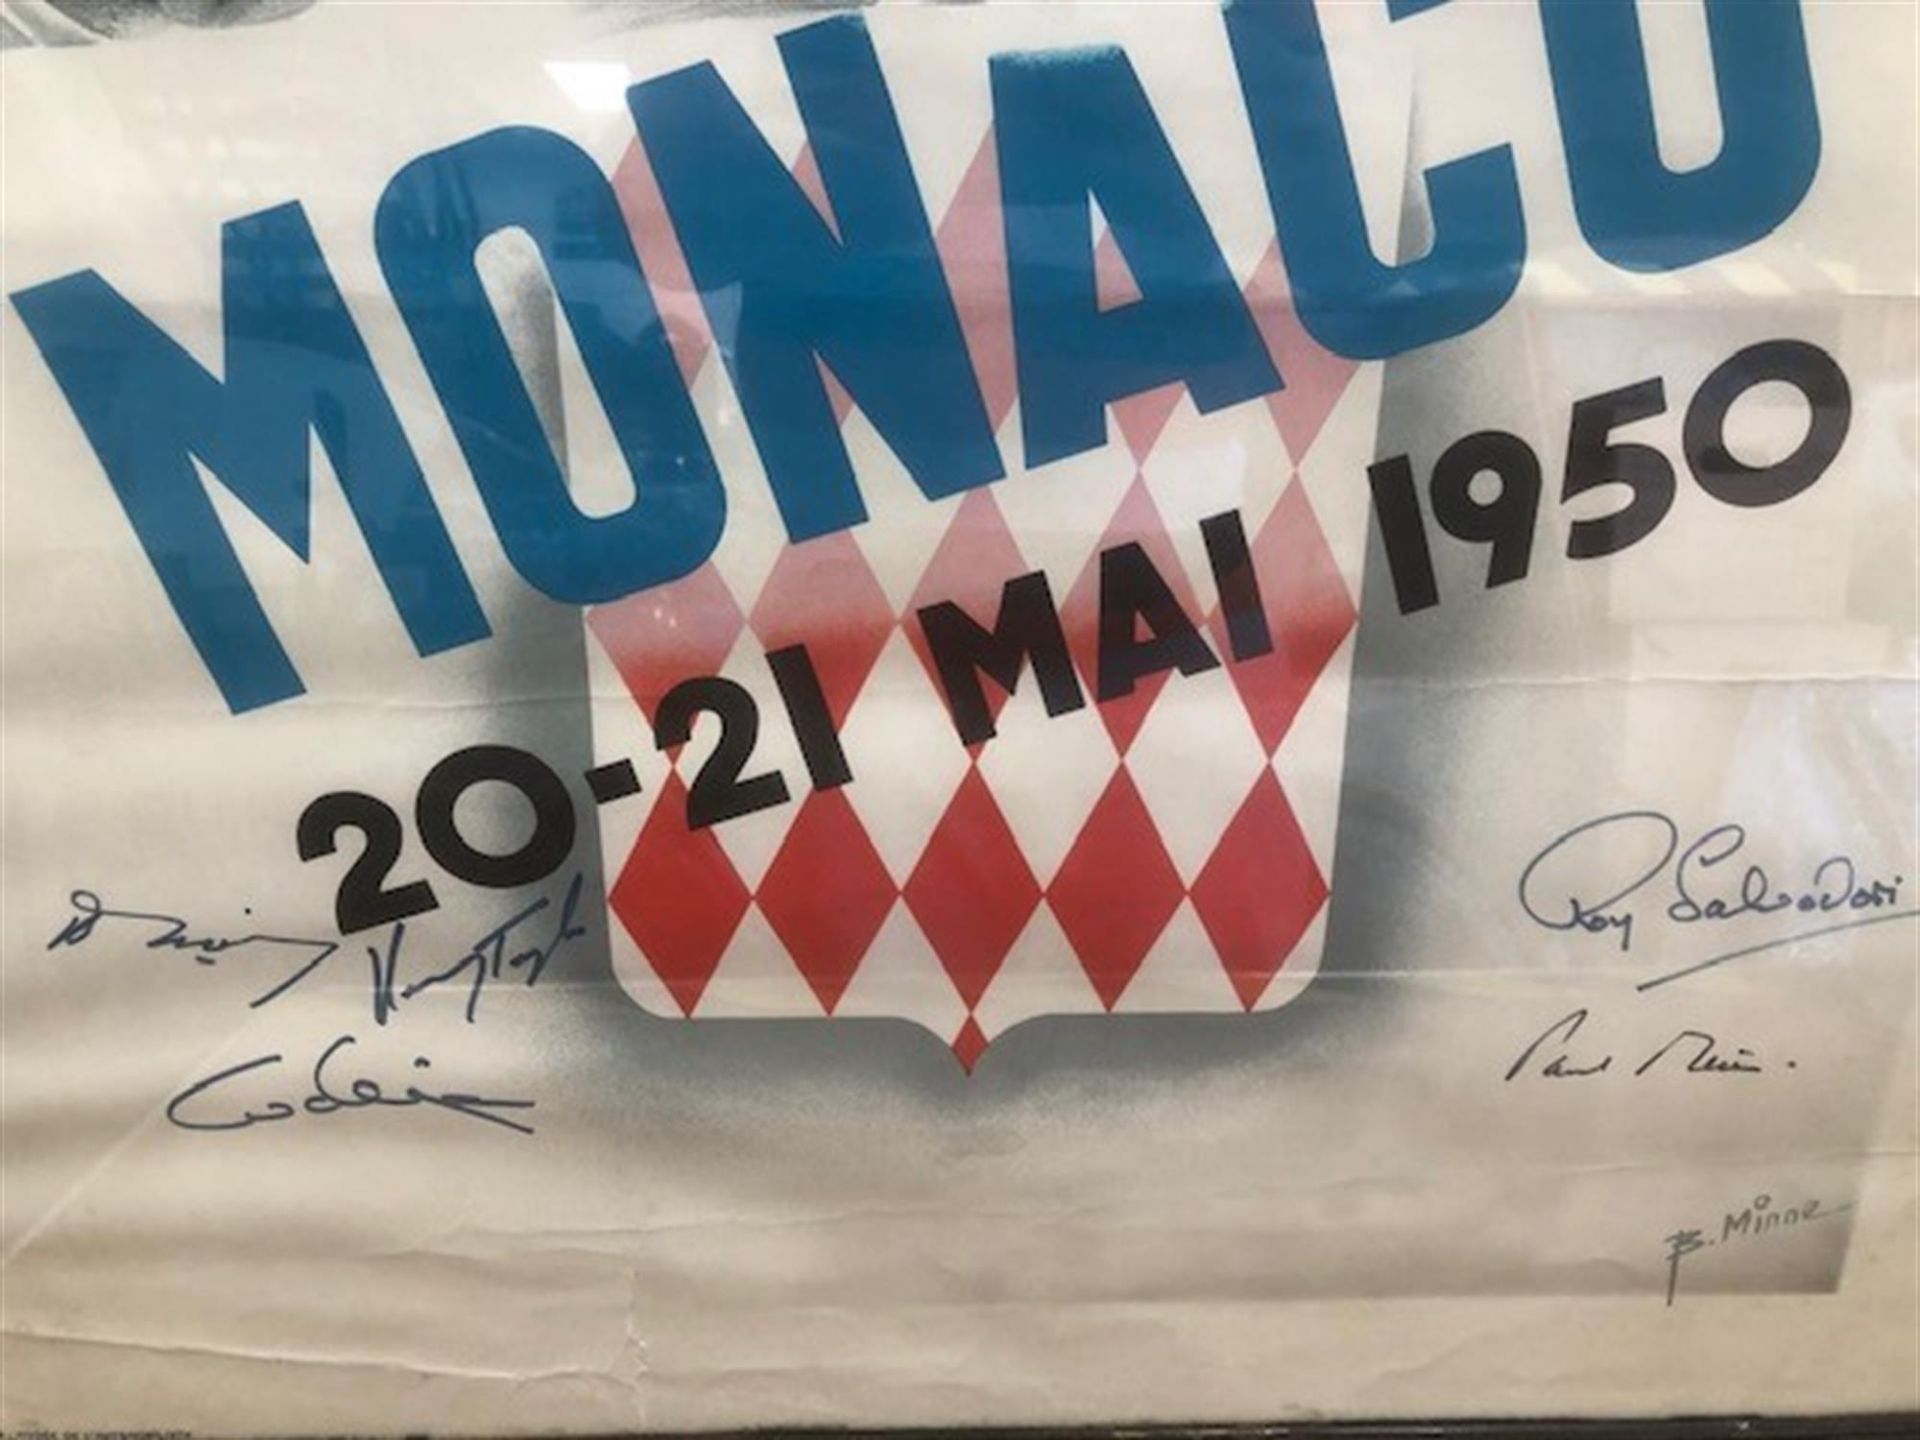 An Original Monaco Grand Prix Poster dated 20th/21st May 1950 - Image 3 of 3